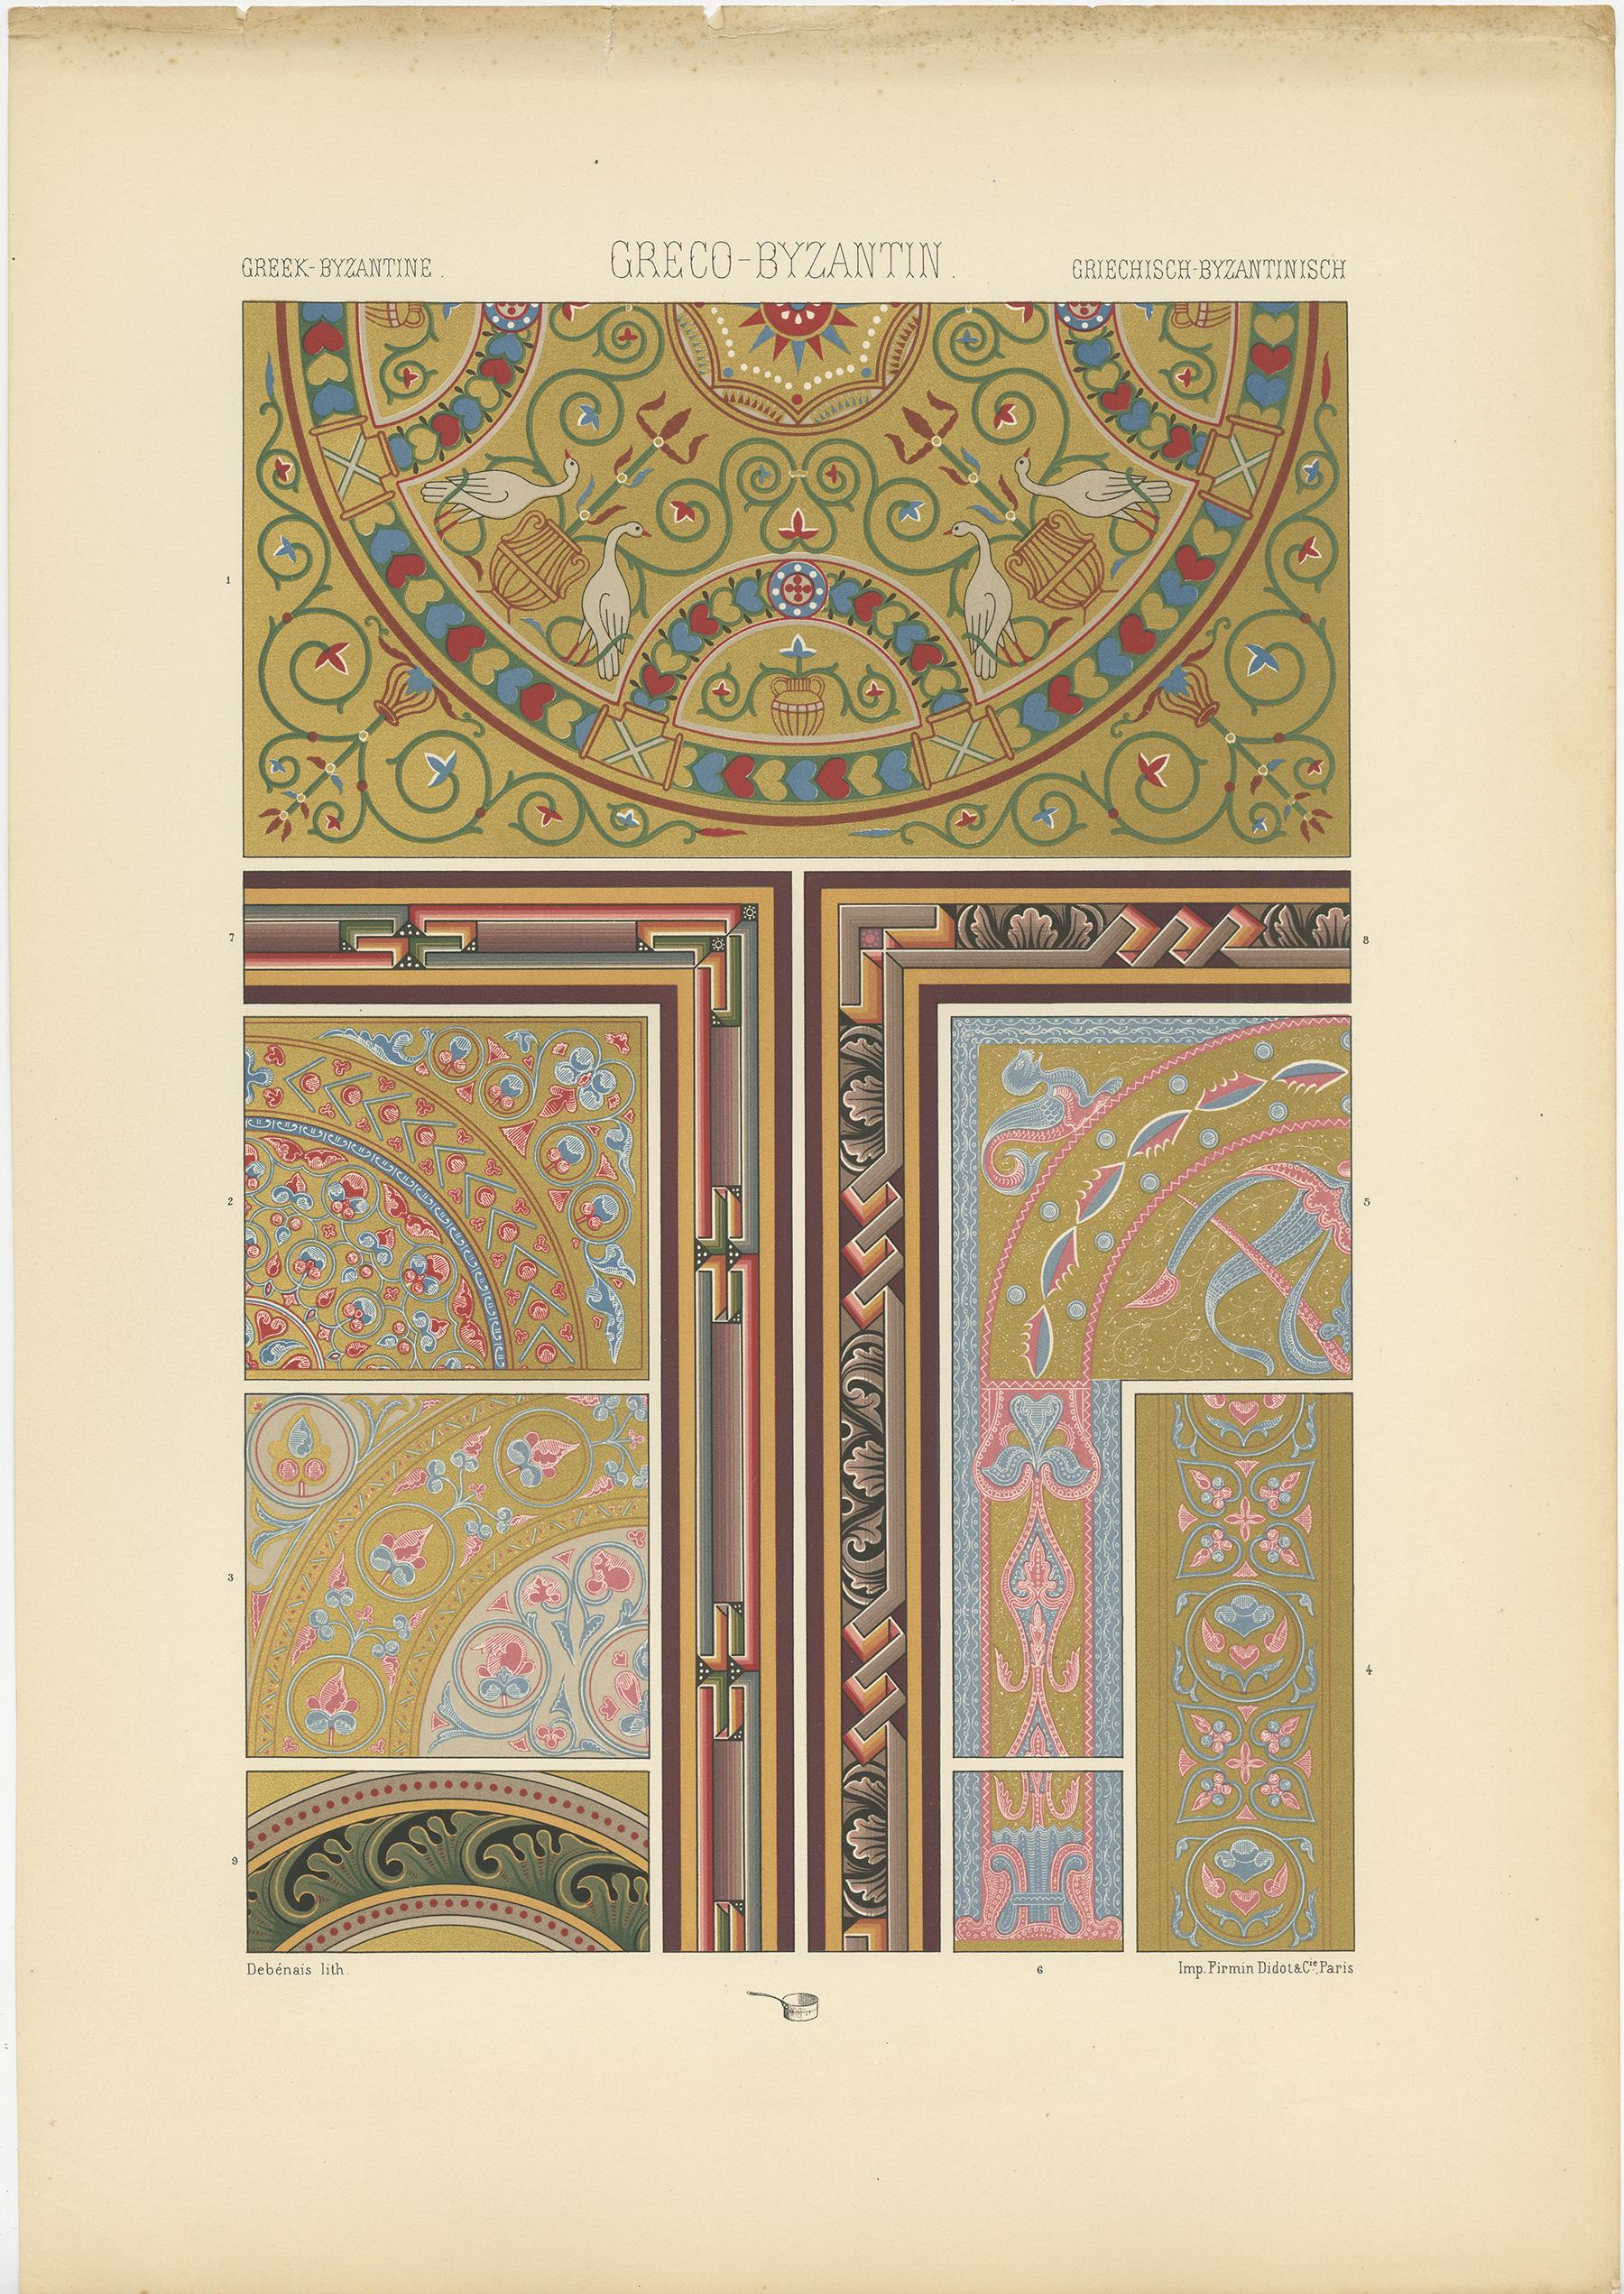 Antique print titled 'Greek-Byzantine - Greco-Byzantin - Griechisch-Byzantinisch'. Chromolithograph of architecture and manuscripts ornaments. This print originates from 'l'Ornement Polychrome' by Auguste Racinet. Published circa 1890.